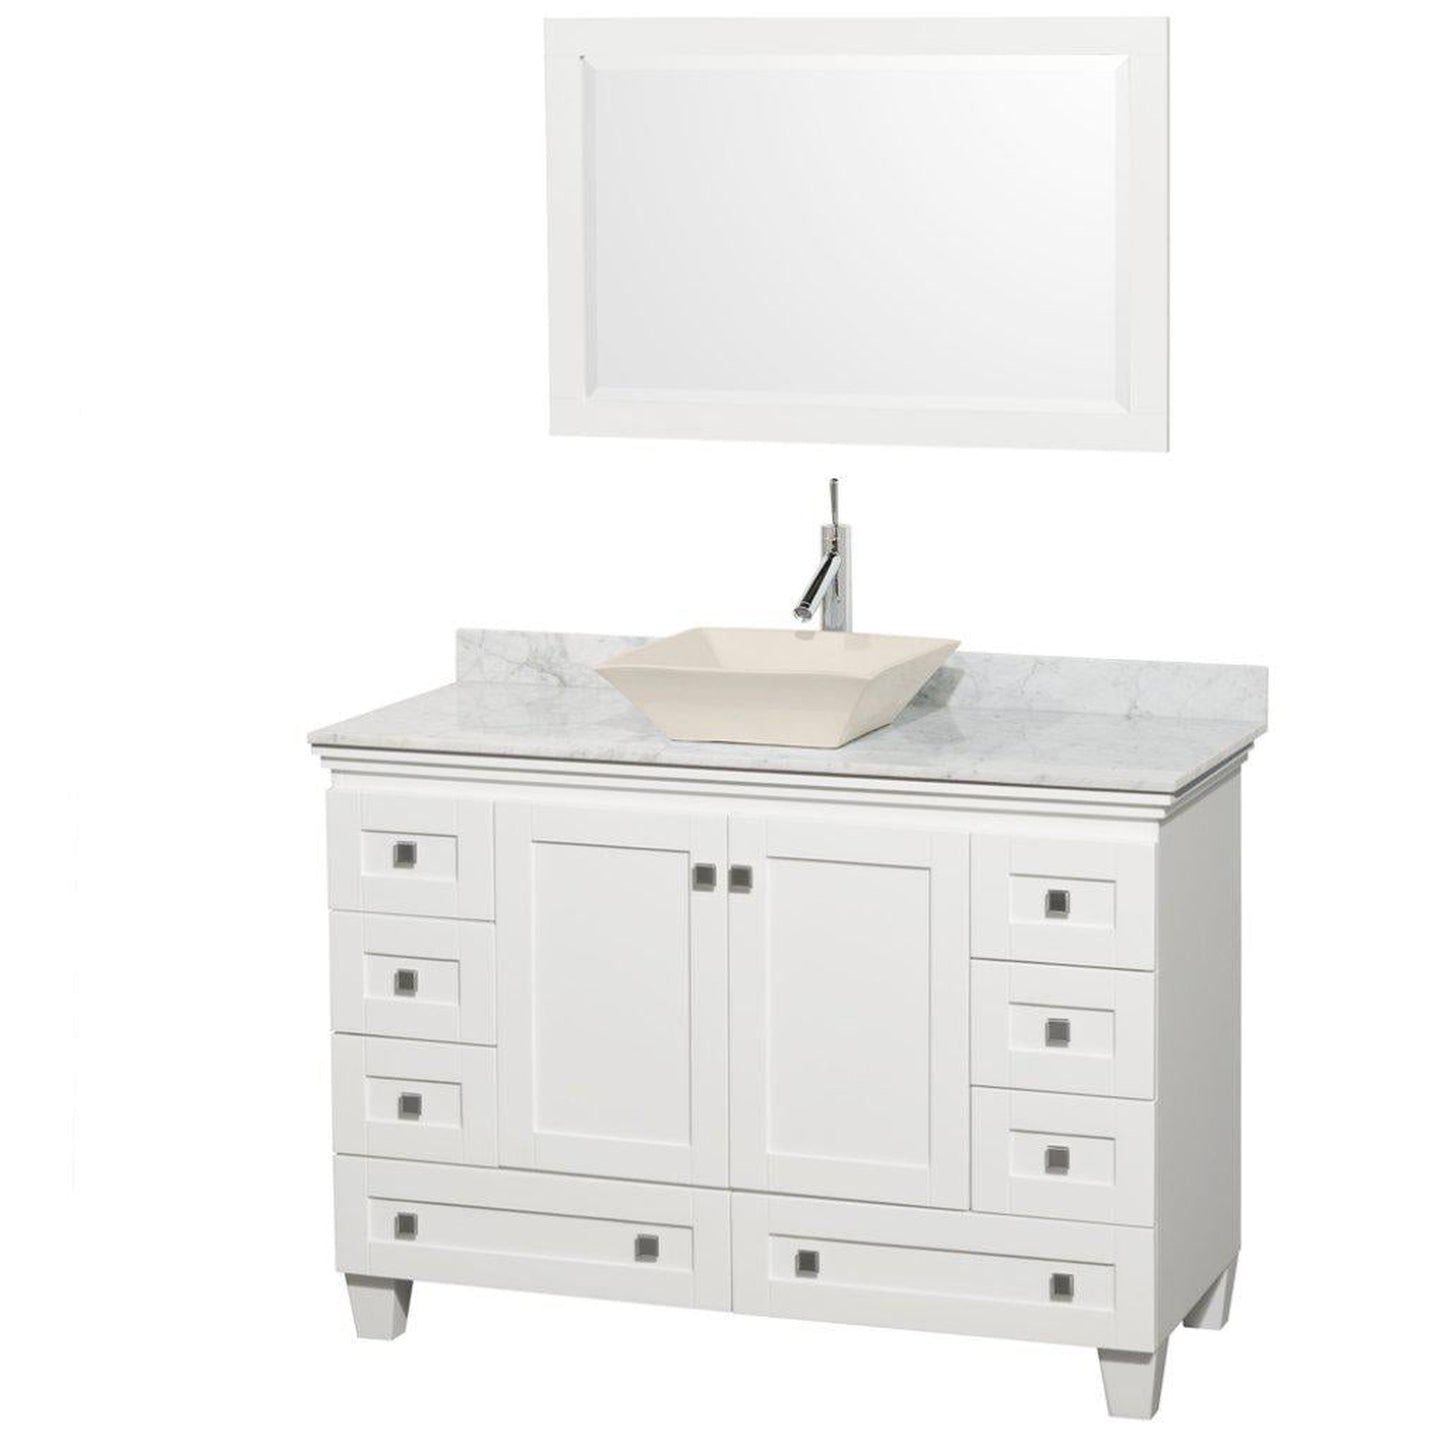 Wyndham Collection Acclaim 48" Single Bathroom White Vanity Set With White Carrara Marble Countertop And Pyra Bone Sink, And 24" Mirror